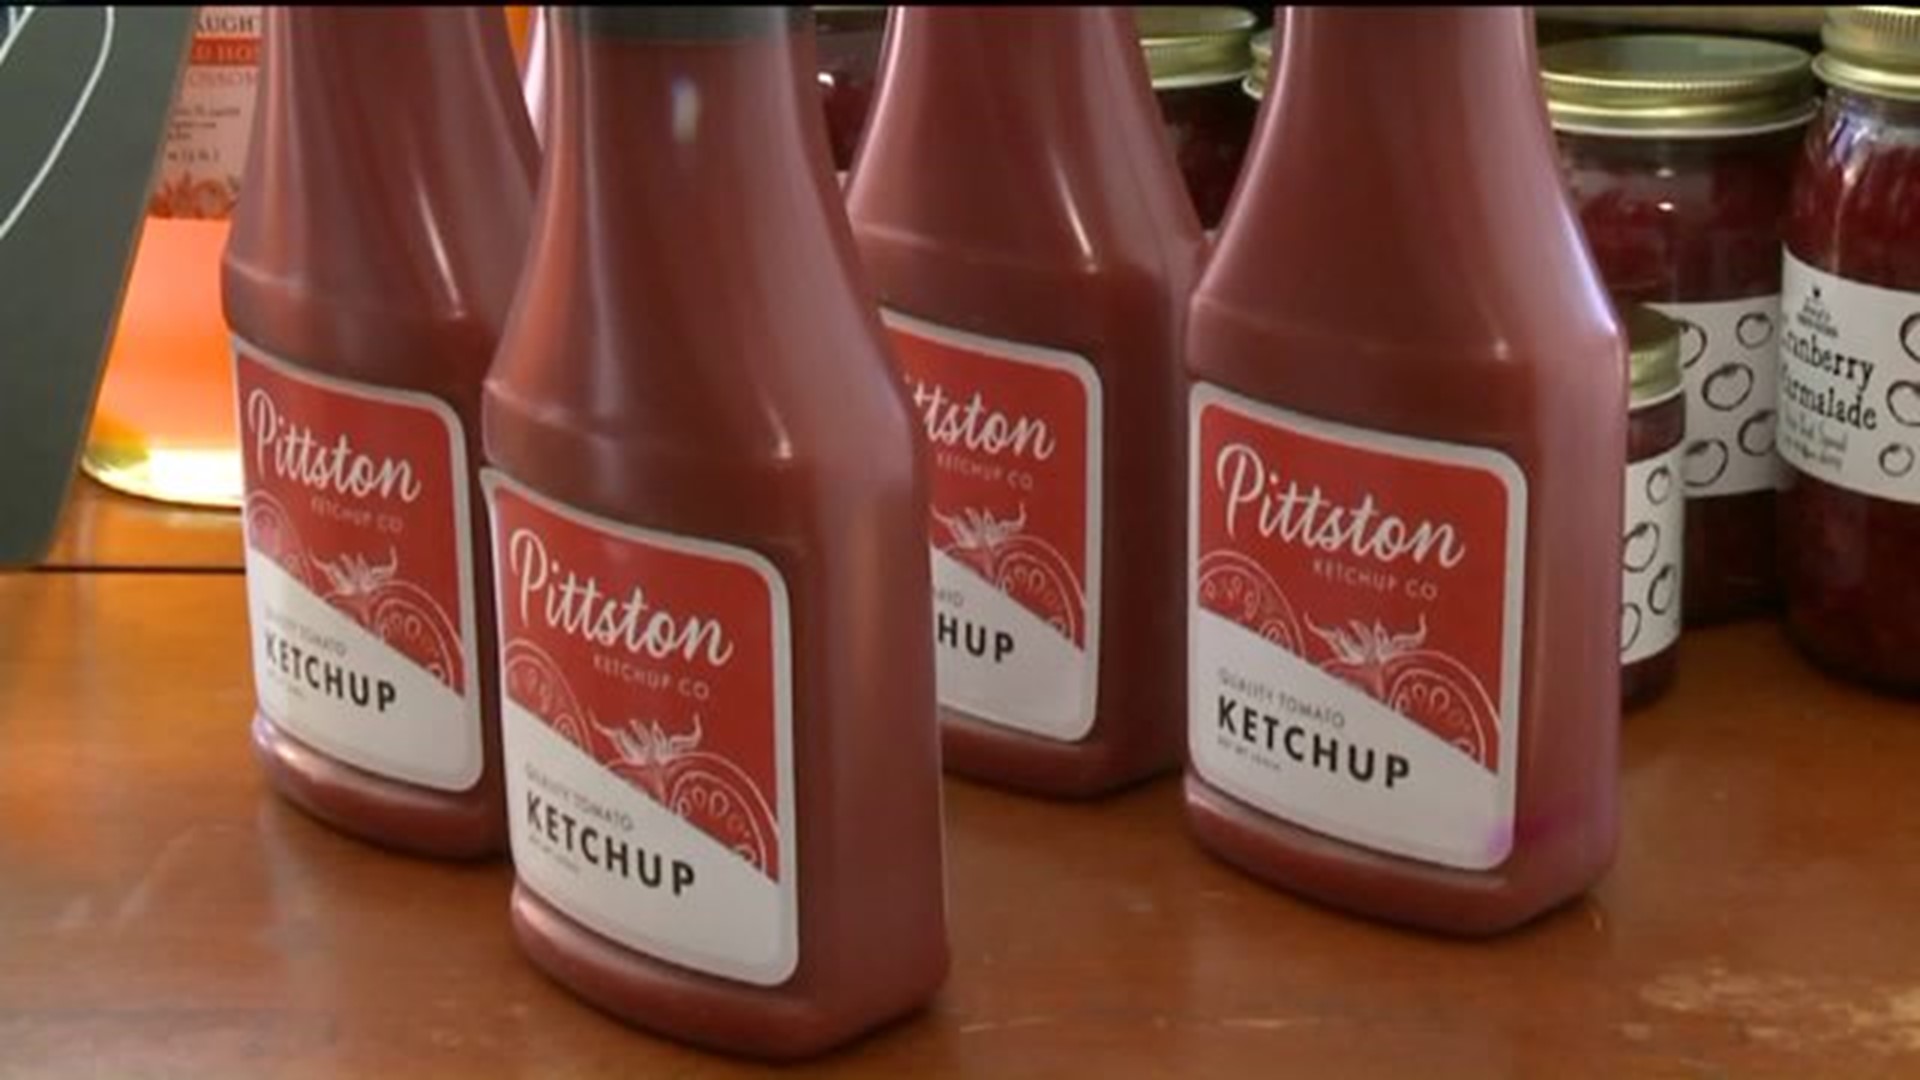 Pittston Ketchup Company Makes Its Debut In Luzerne County